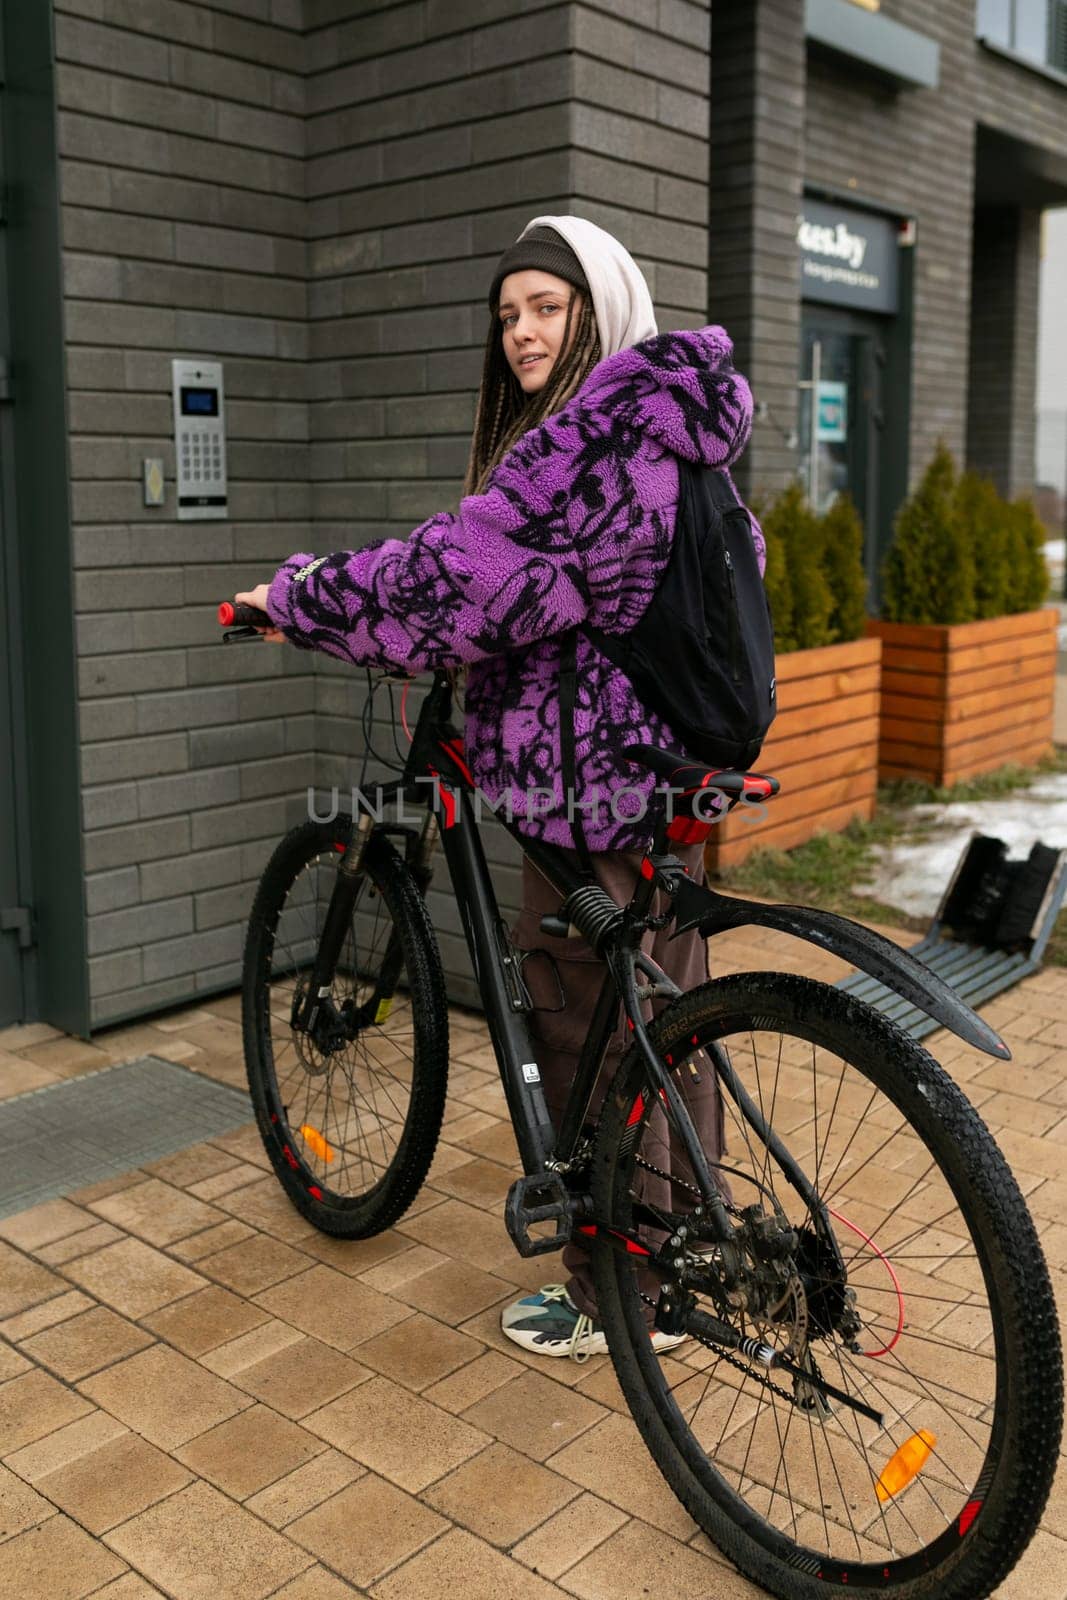 Bicycle rental concept. A young woman with dreadlocks spent a walk around the city riding a bicycle.